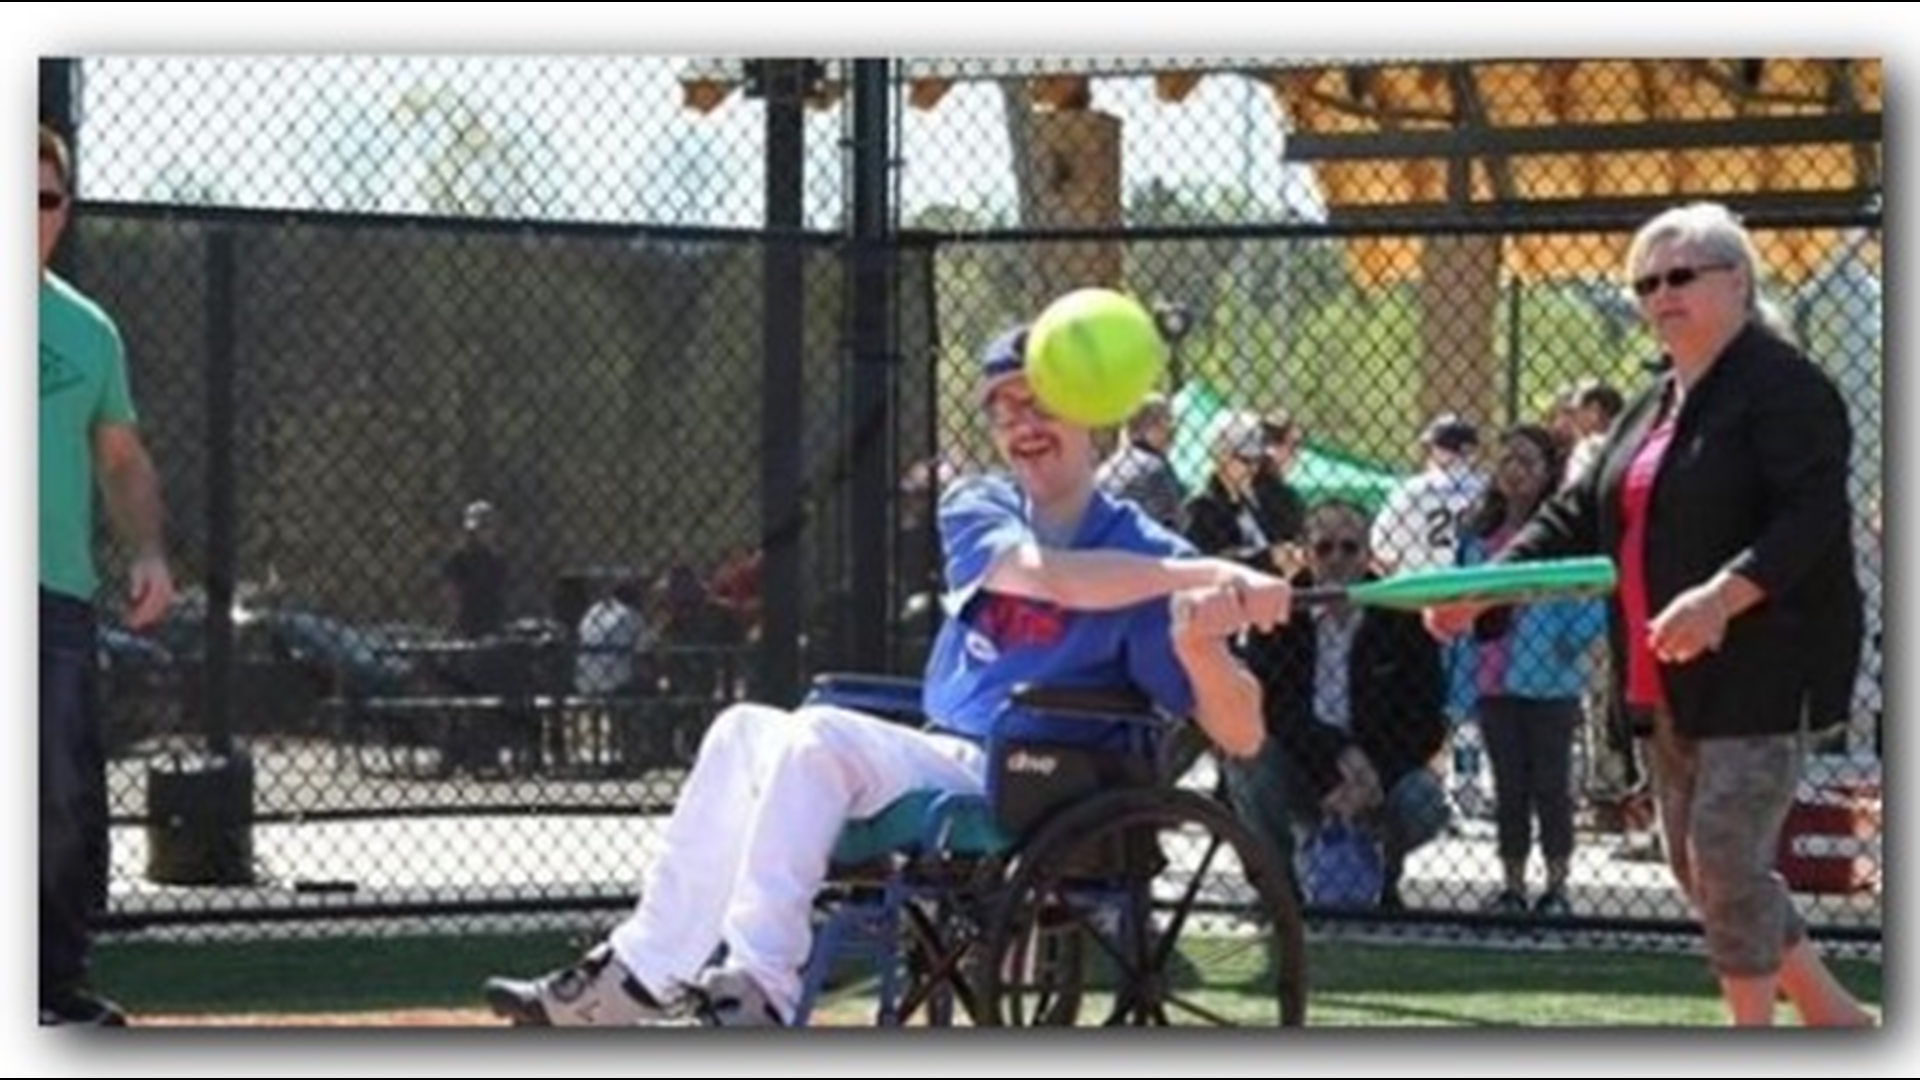 North Metro Miracle League in Cherokee County said it's been trying to appeal the decision for over a week but organizers said Facebook is digging in its heels. The organization, which helps get children with disabilities out on the baseball field -- wanted to post an ad asking for volunteer "buddies" to help protect the athletes and walk them out on the field.